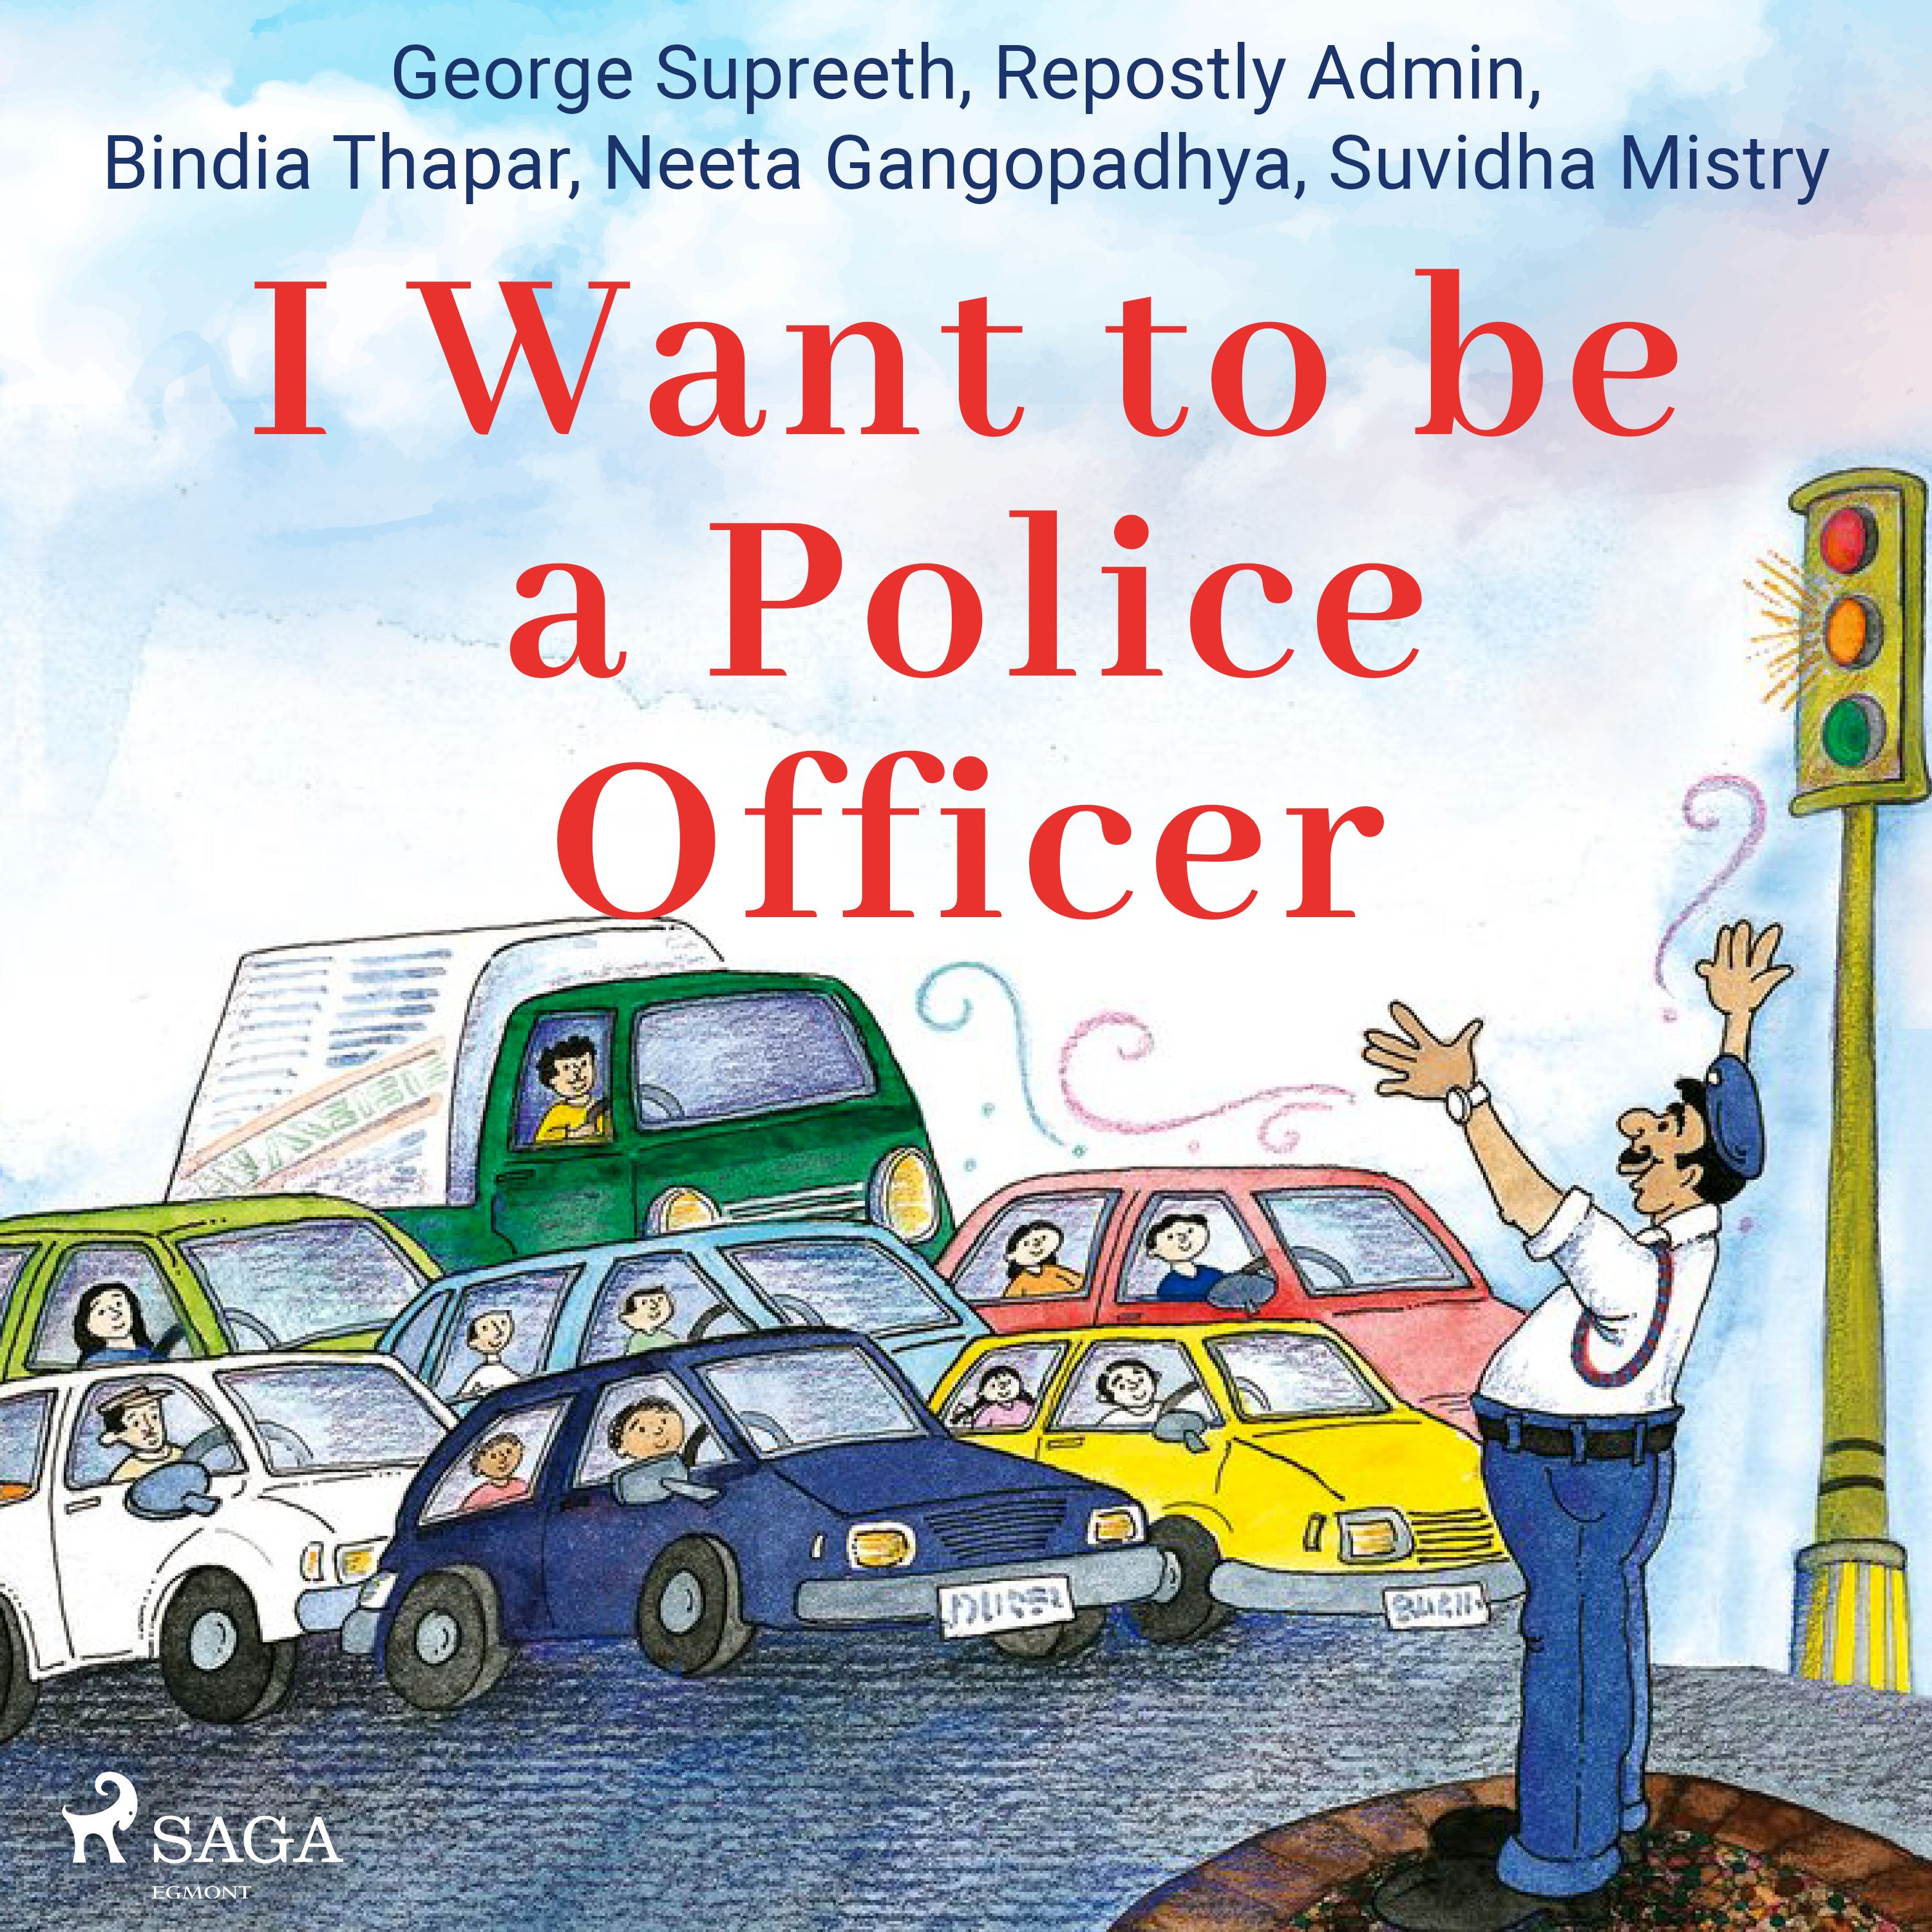 I Want to be a Police Officer, audiobook by Repostly Admin, Neeta Gangopadhya, Suvidha Mistry, George Supreeth, Bindia Thapar